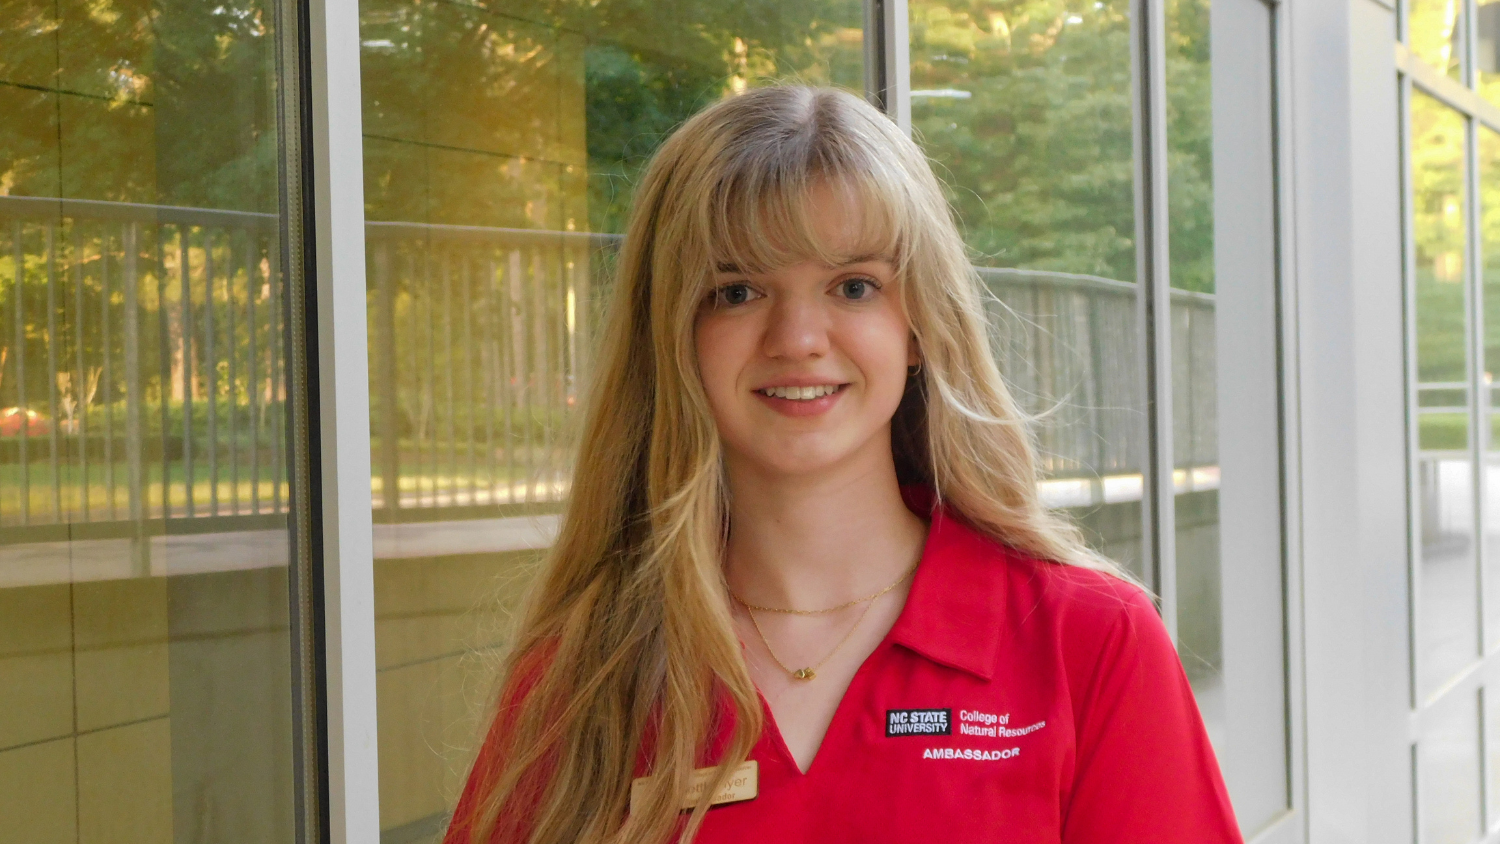 Celia Settlemyer - College of Natural Resources Ambassadors - College of Natural Resources at NC State University